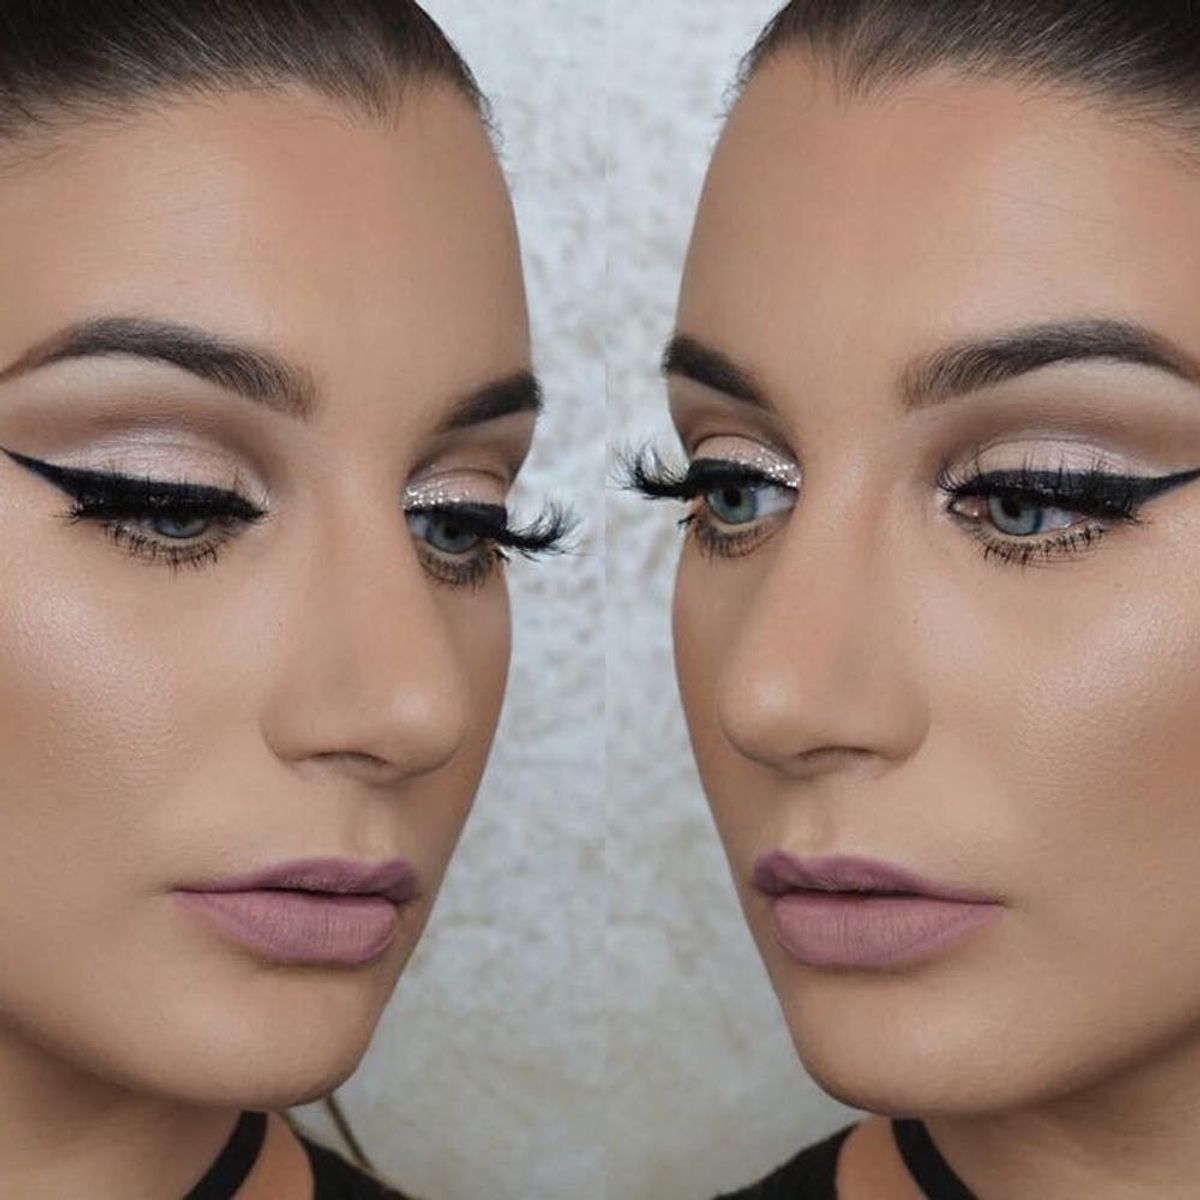 You Only Need a Spoon for This Genius Eyeshadow Hack